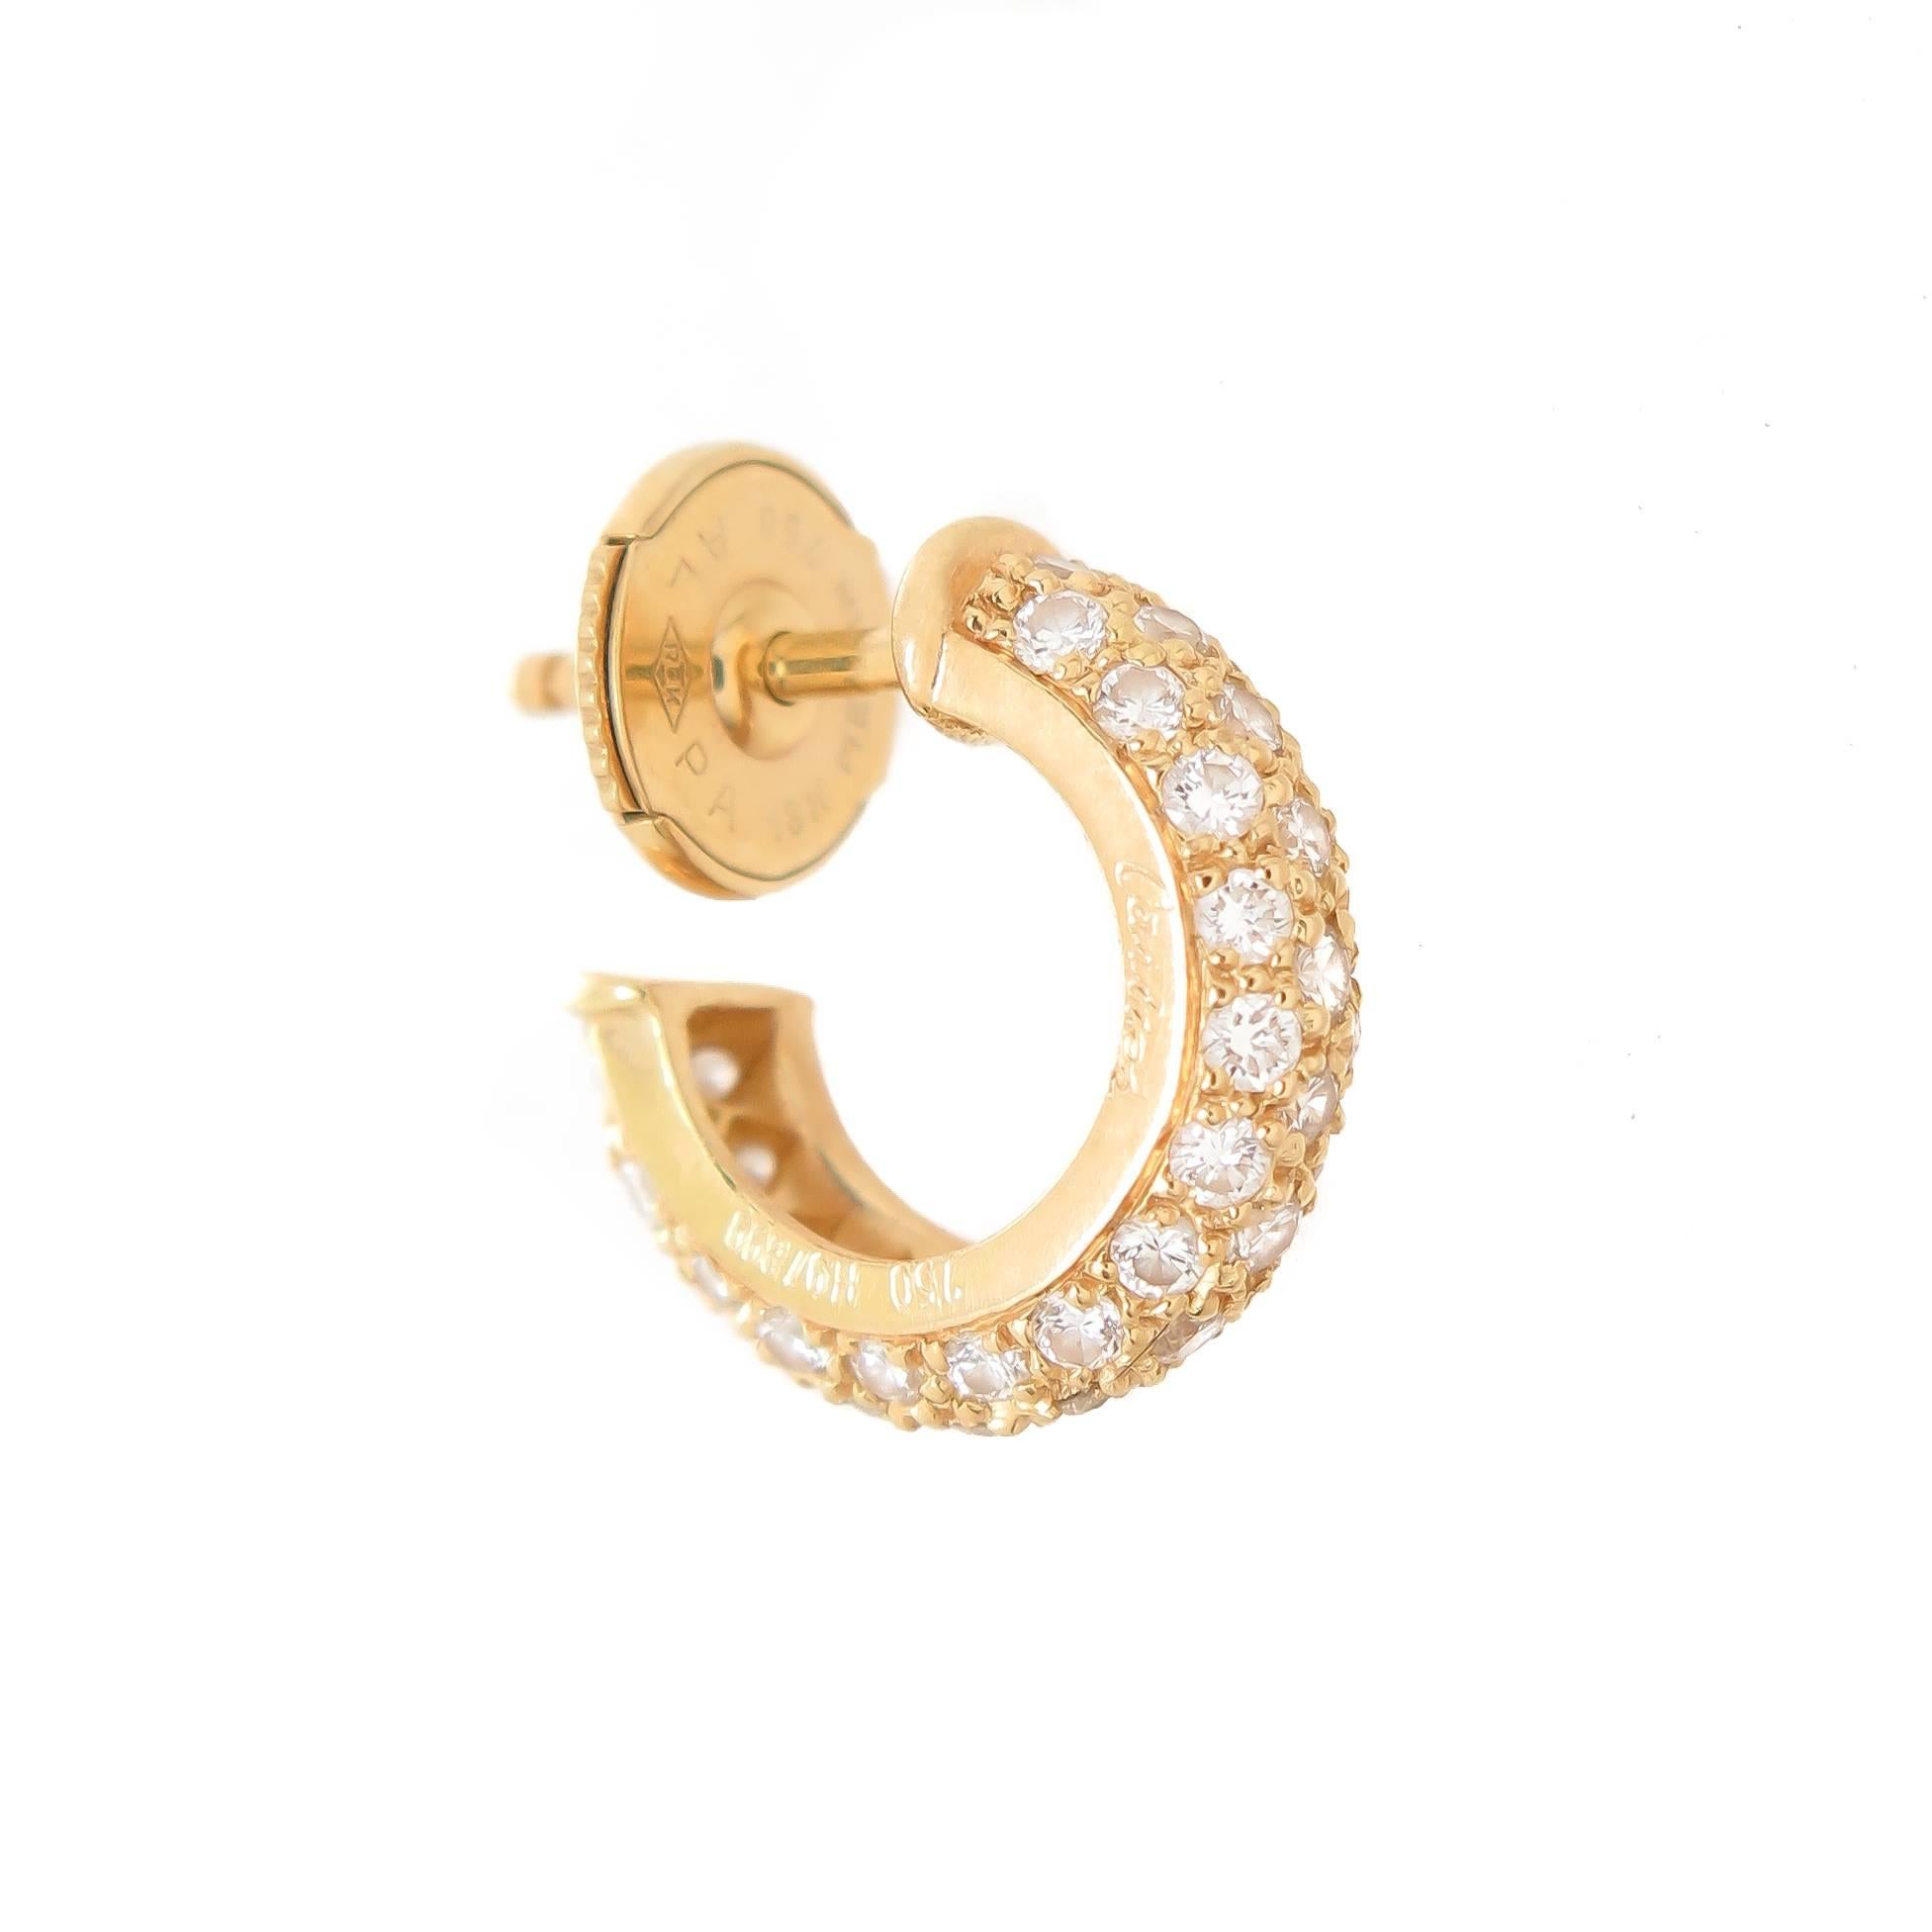 Circa 2010 Cartier 18K Yellow Gold Mini Hoop / Hugge Earrings, measuring 1/2 inch in length and diameter. Pave set with Fine White round Brilliant cut Diamonds totaling .35 carat.  Have pressure fit backs on posts. Comes in a Cartier Presentation